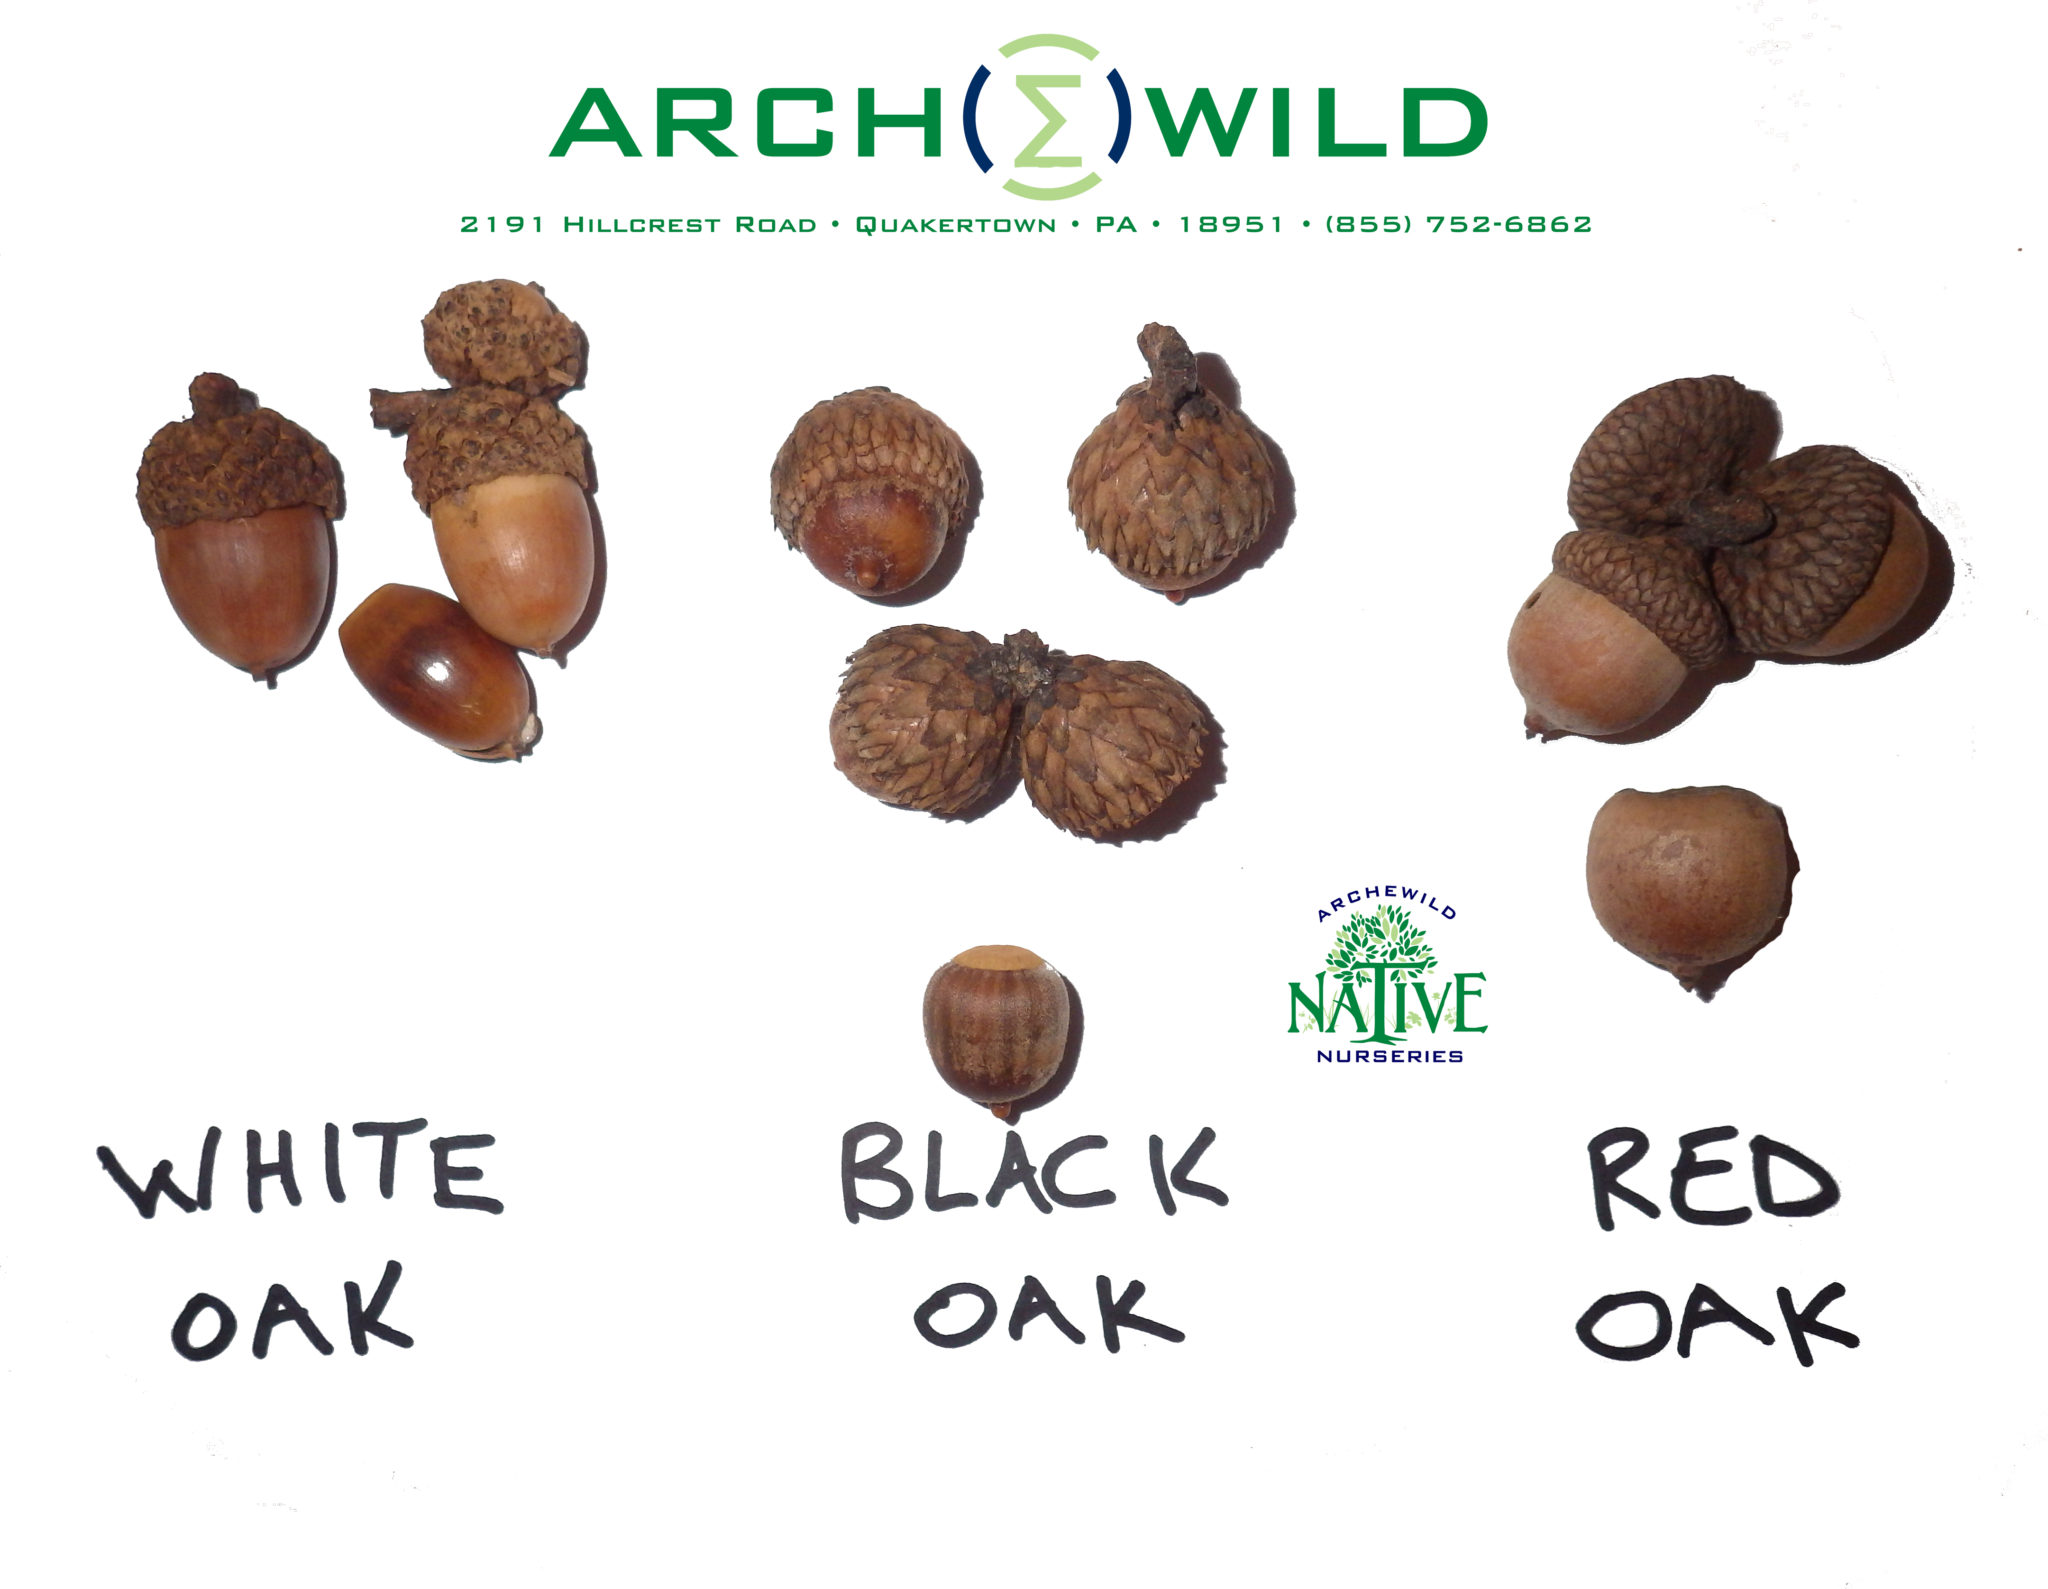 Trees With Acorns Identification - All information about healthy